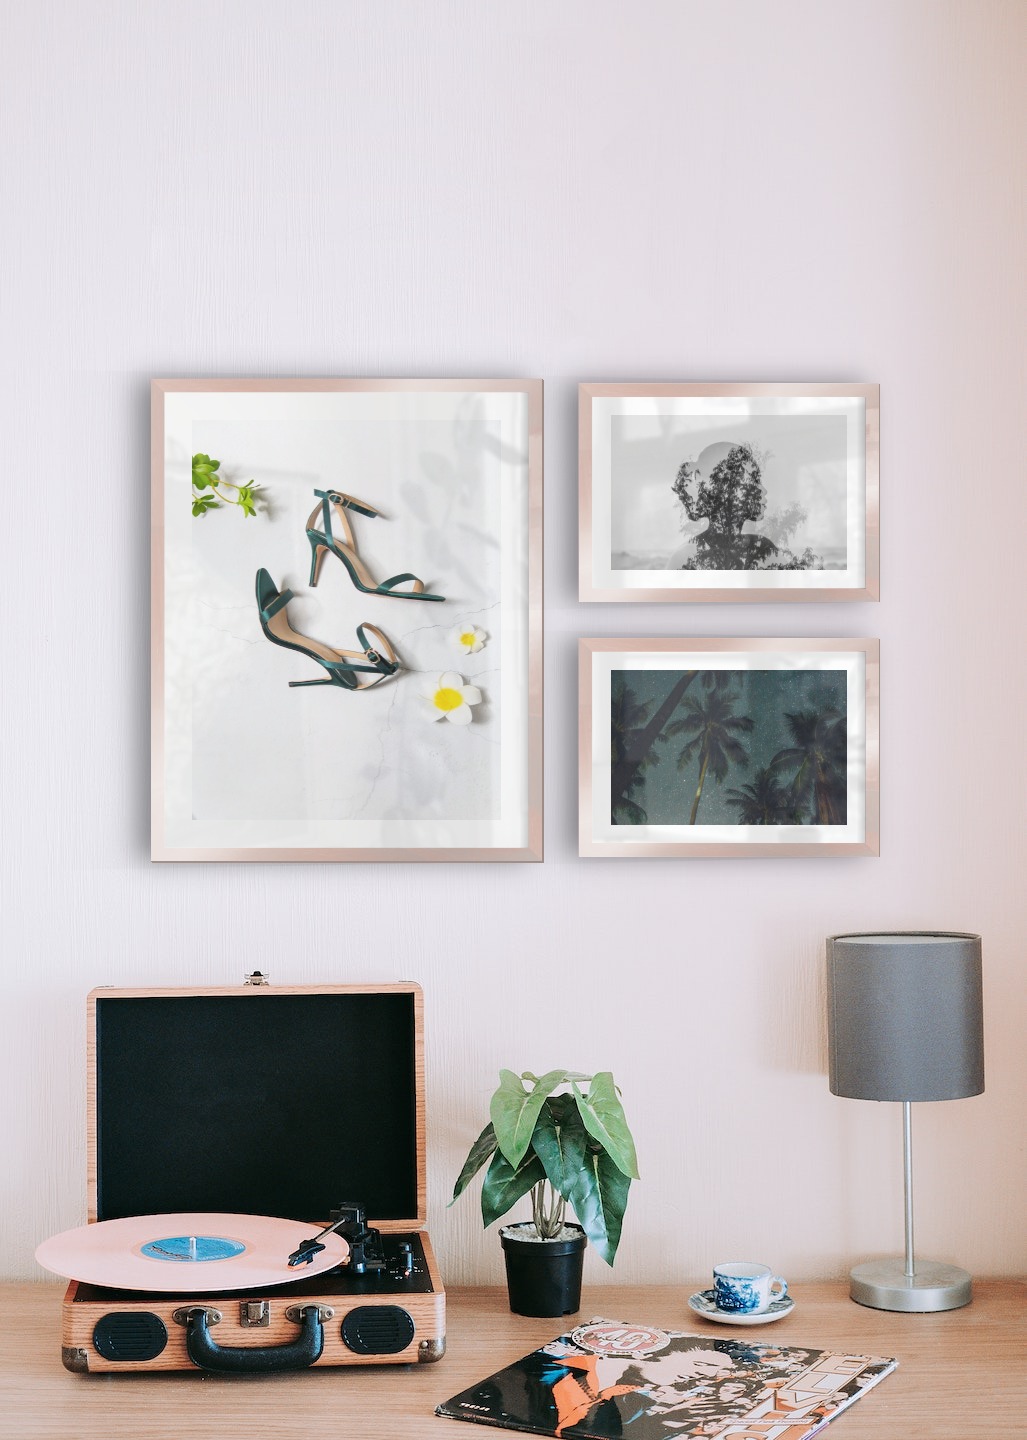 Gallery wall with picture frames in copper in sizes 40x50 and 21x30 with prints "Heels", "Trees and silhouette" and "Palm trees and night sky"